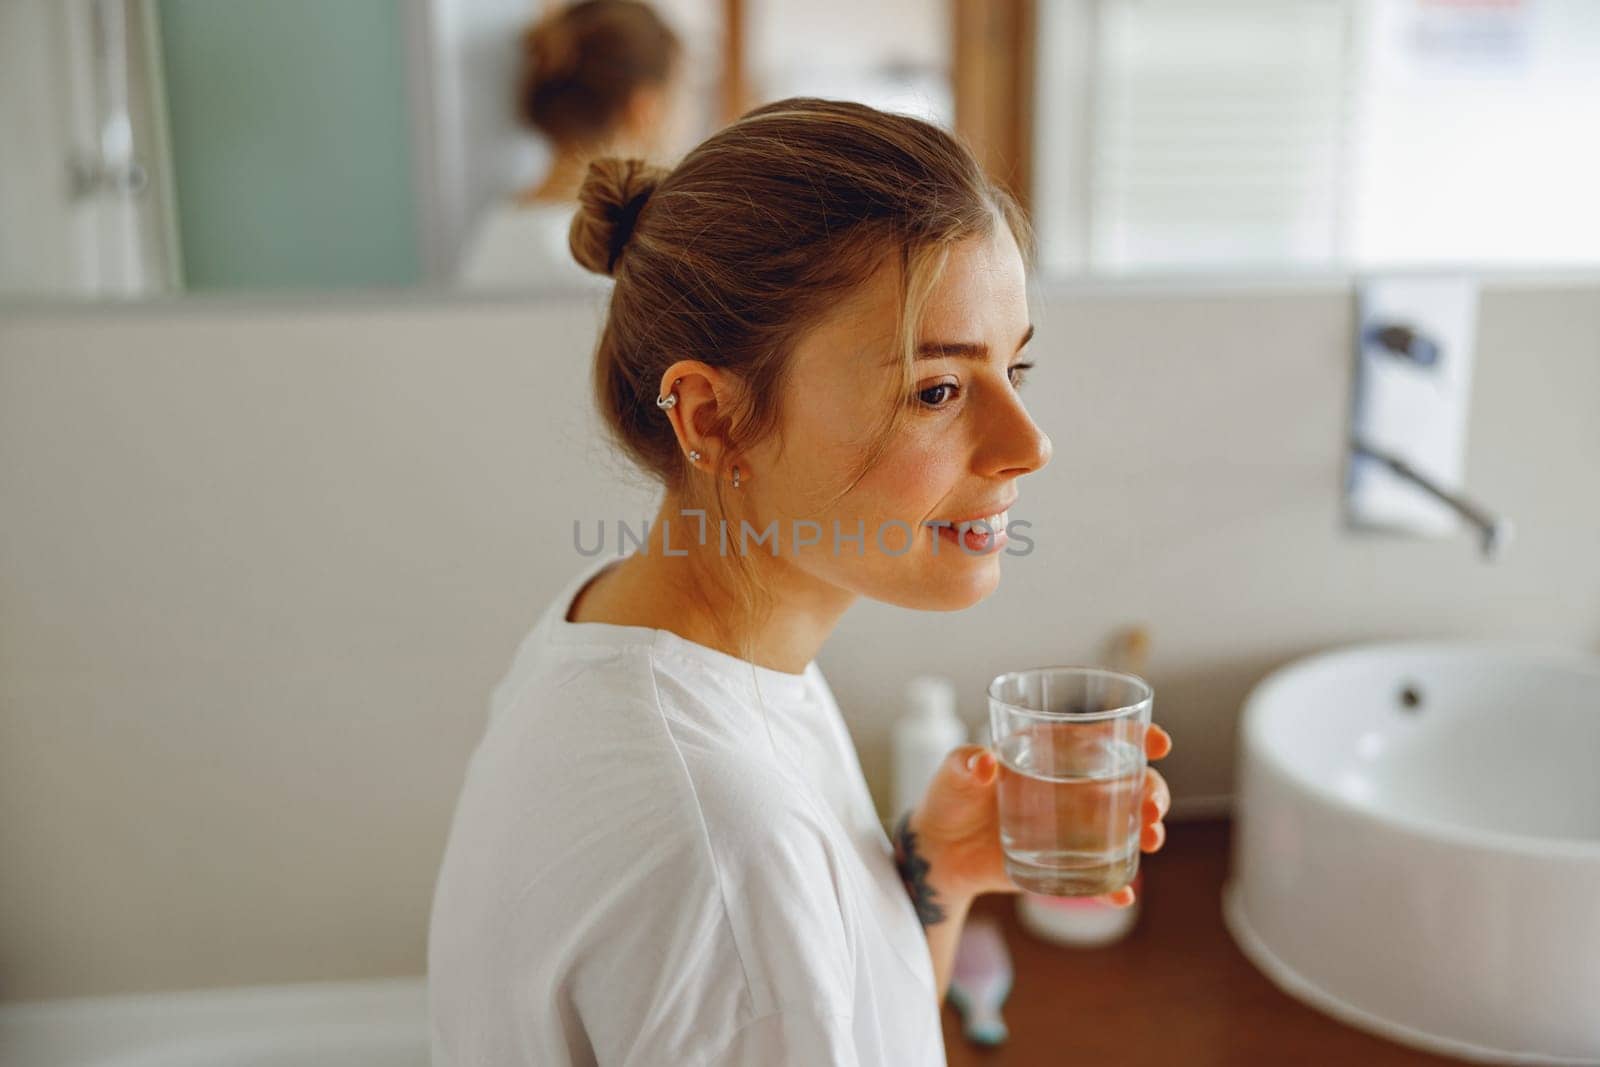 Smiling young woman drinking glass of water in the bathroom. Morning beauty routine